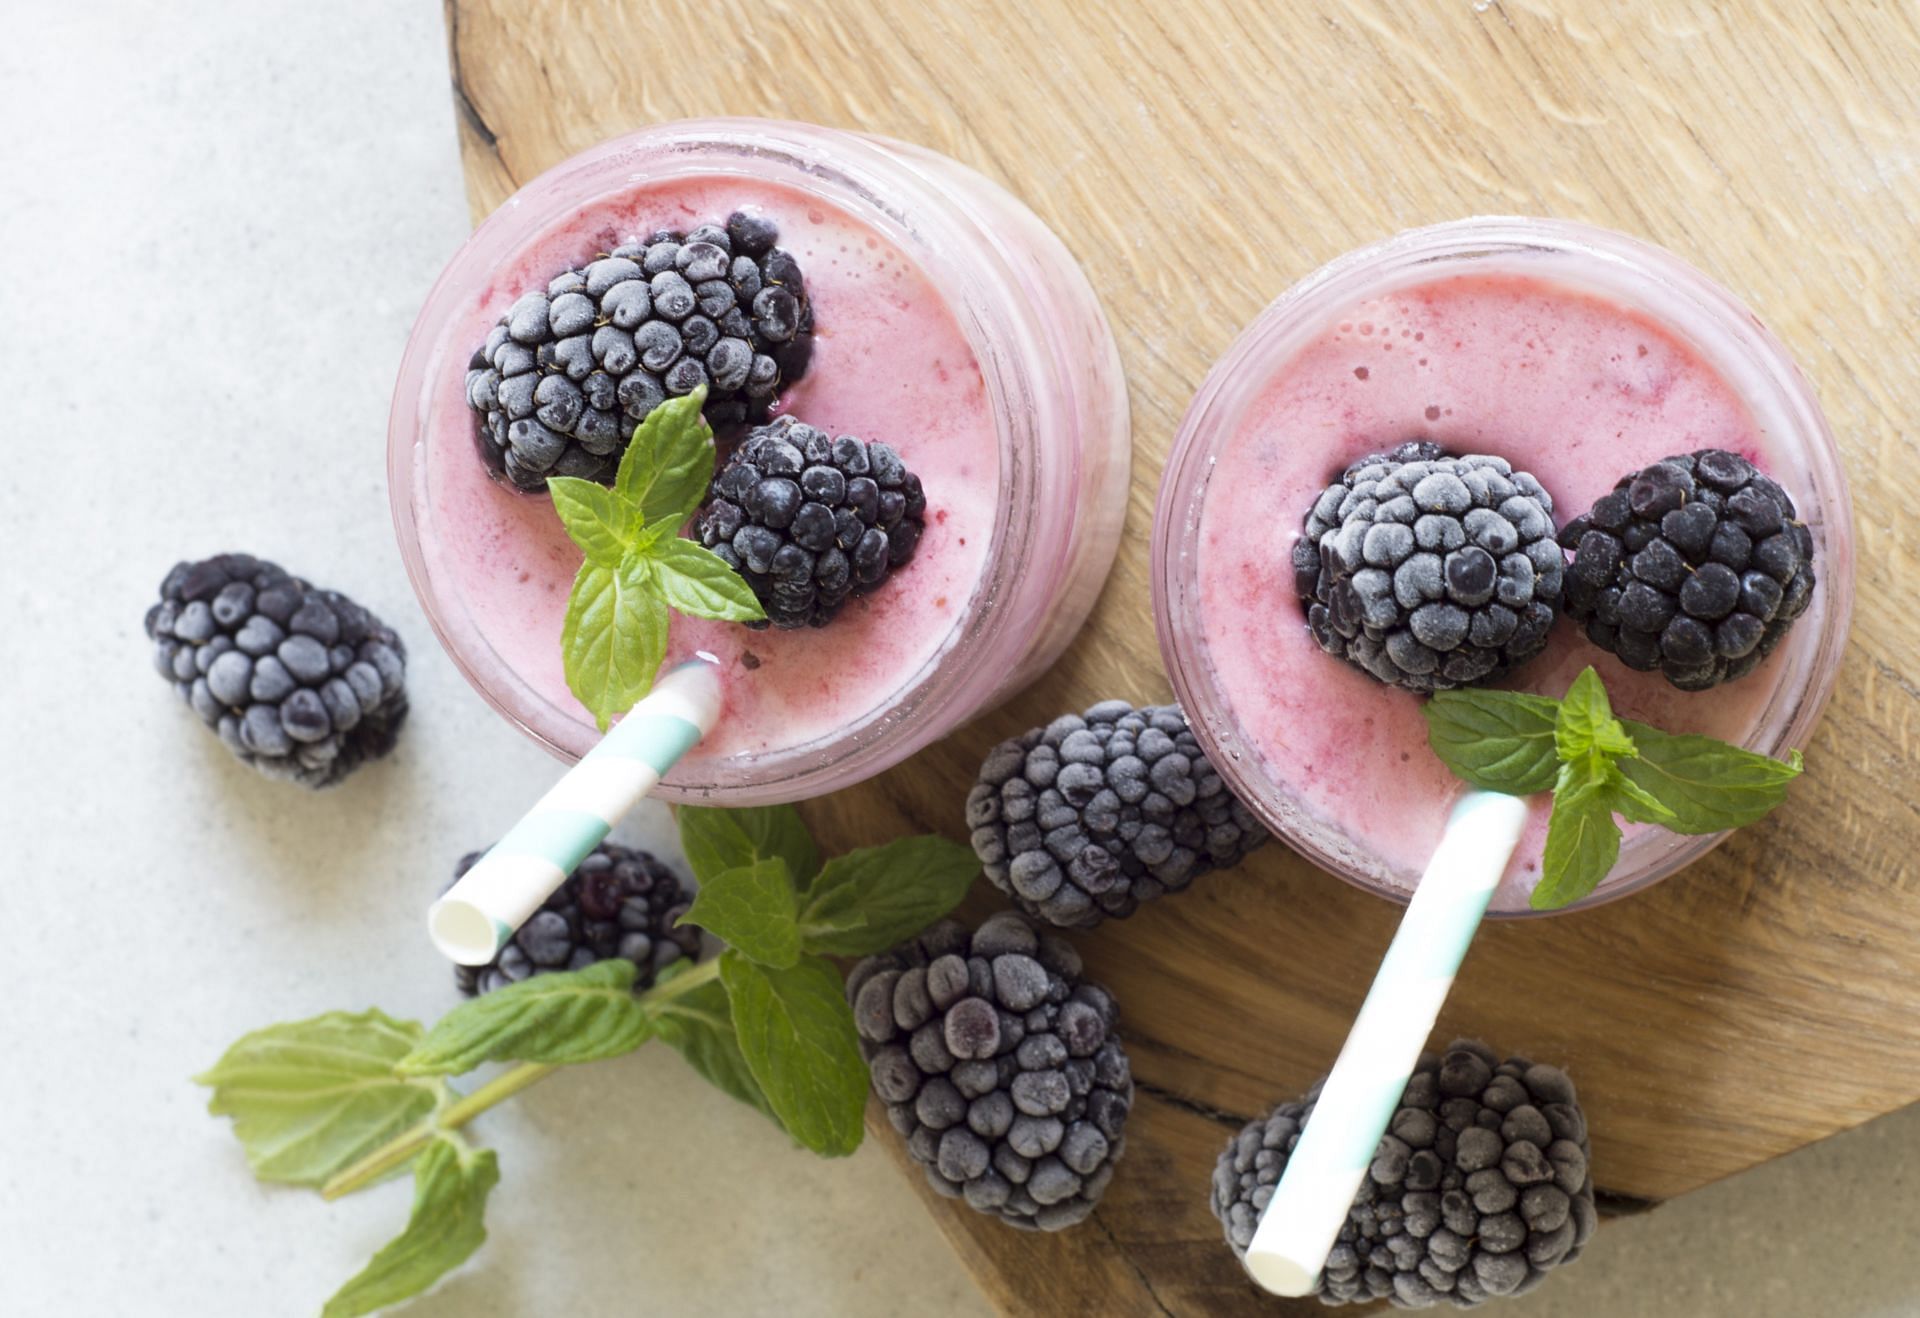 Blackberries are a sweet and tangy fruit that is often used in pies, jams, and other desserts (Image via Pexels)